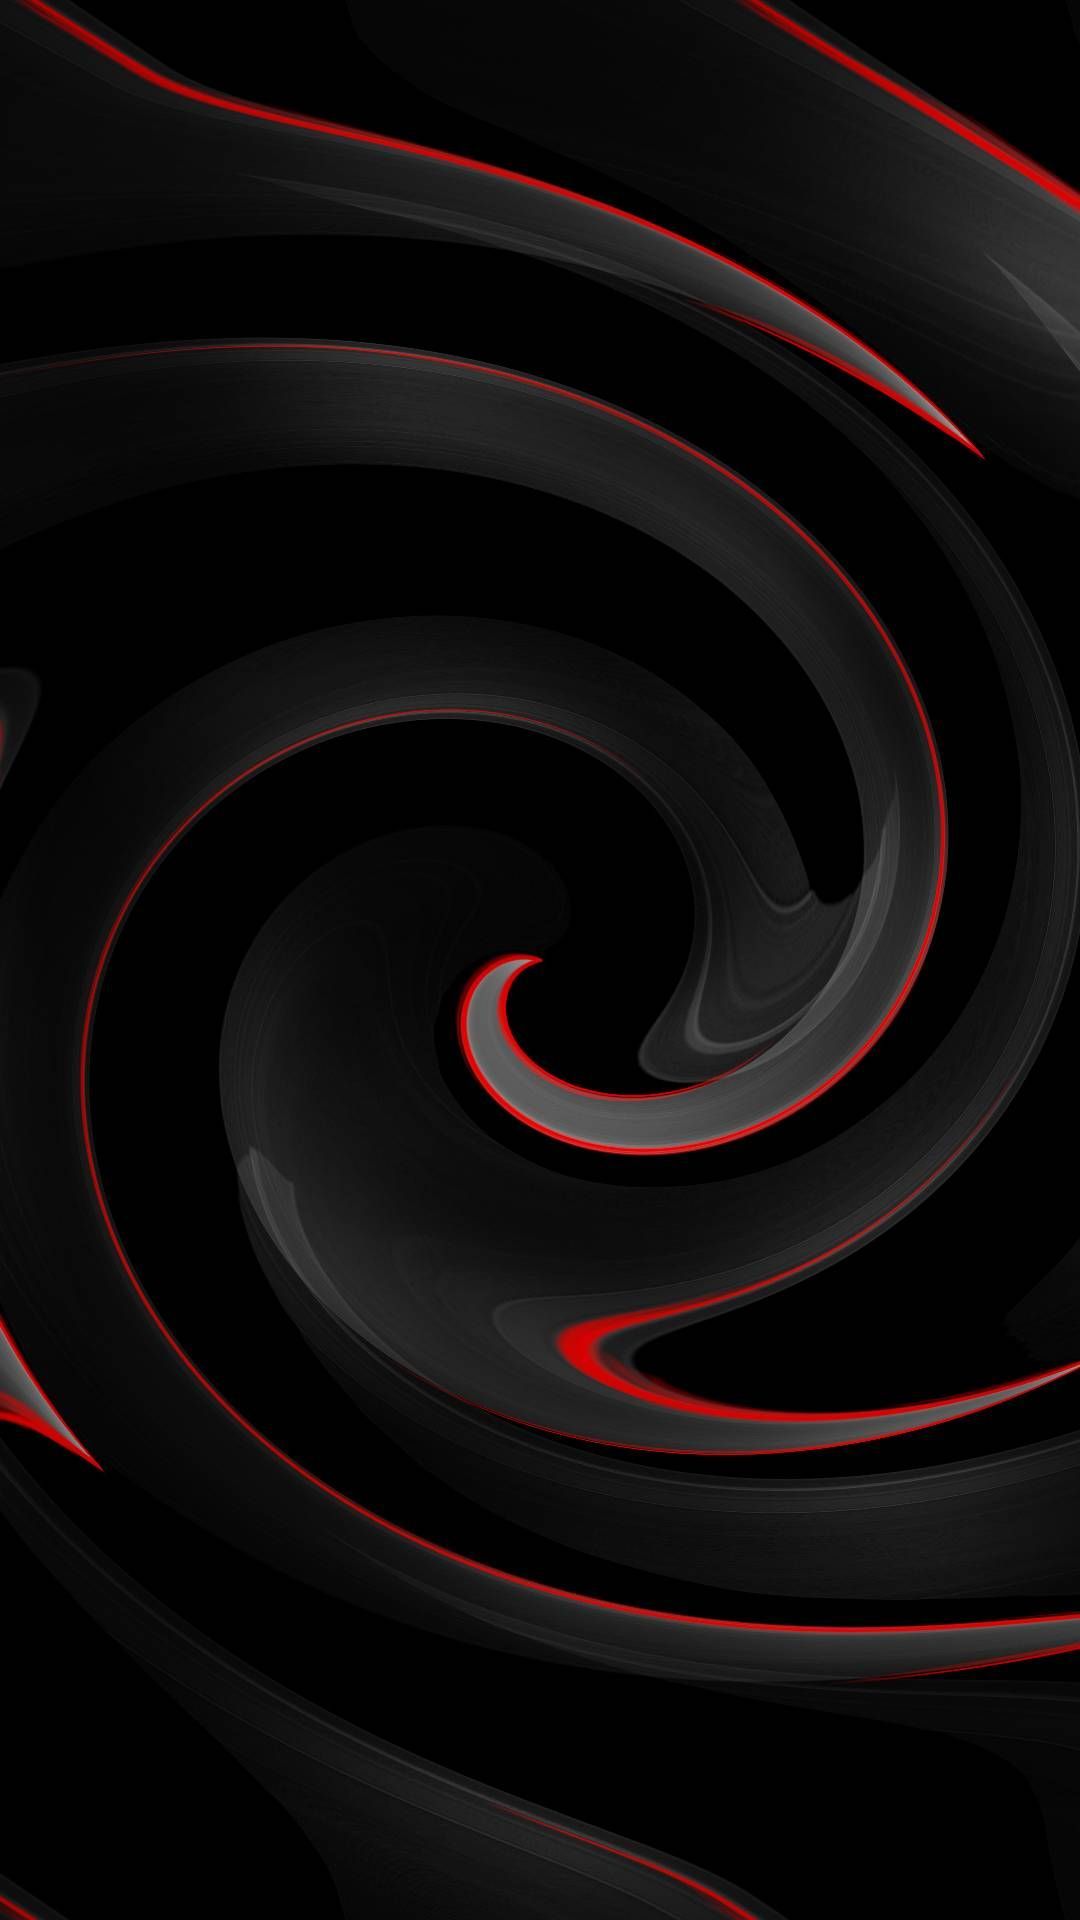 iphone wallpaper black red spiral vortex graphics circle 13 pro max Wallpaper, iPhone 12 Background, iPhone Wallpaper, iPhone background., WallpaperUpdate, Best iPhone Wallpaper and iPhone background